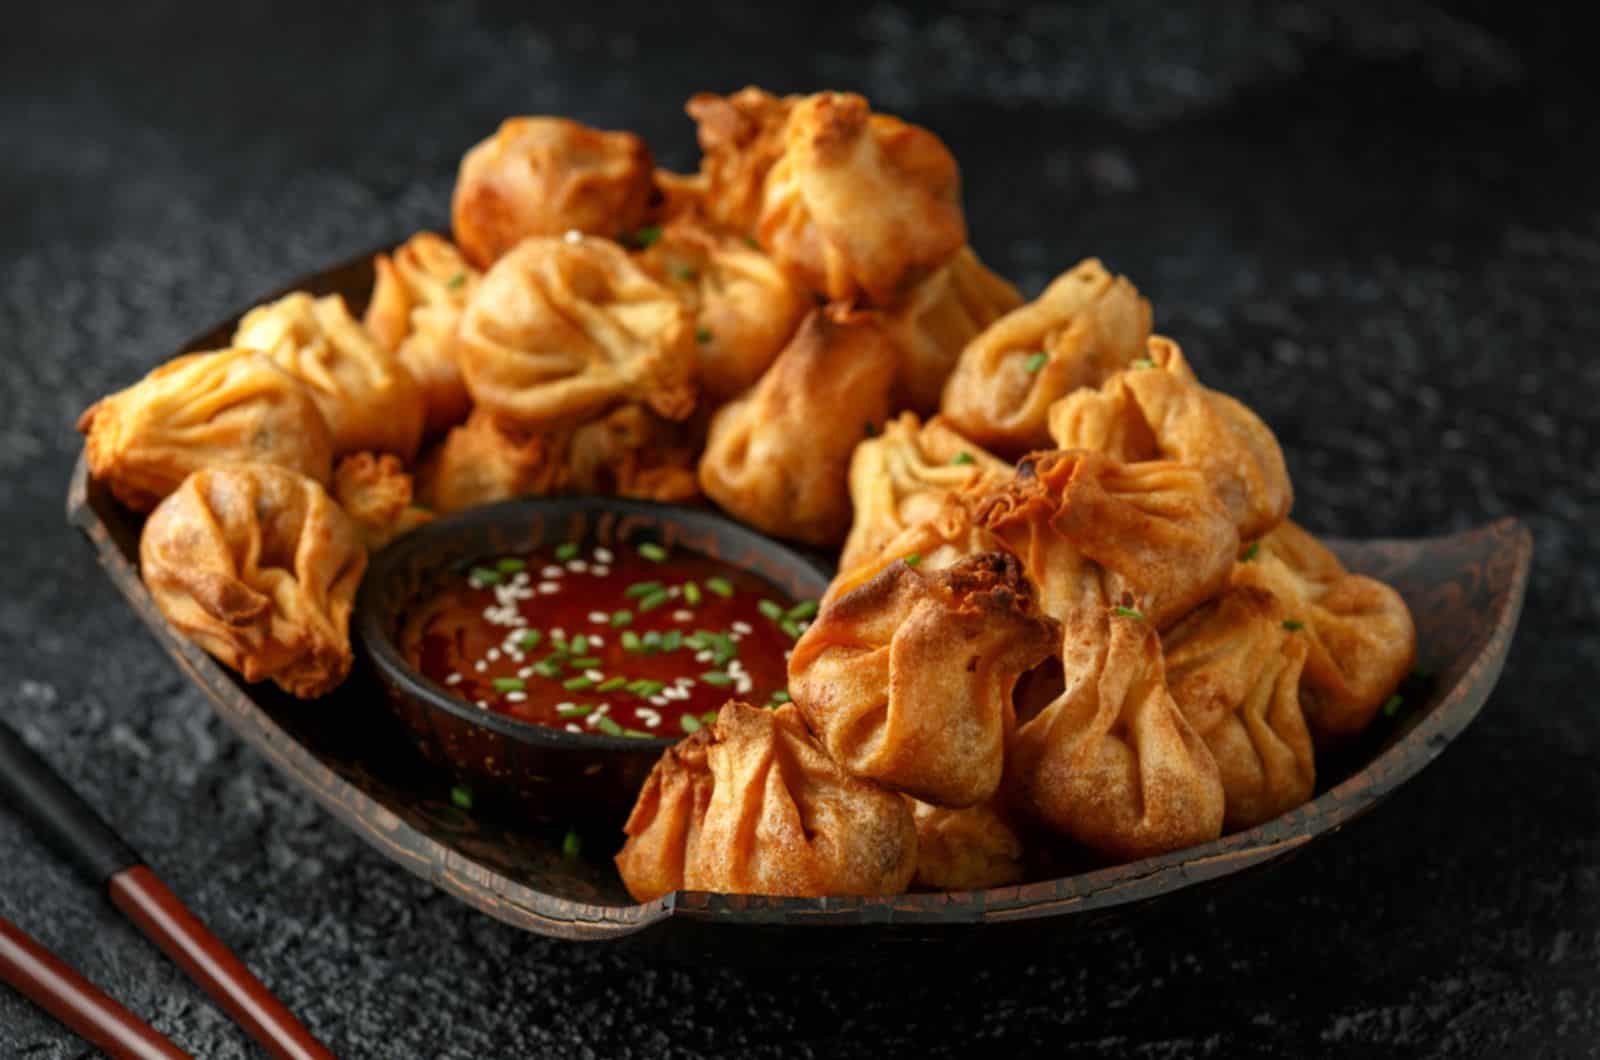  Vegetable wontons with sweet chilli dip sauce